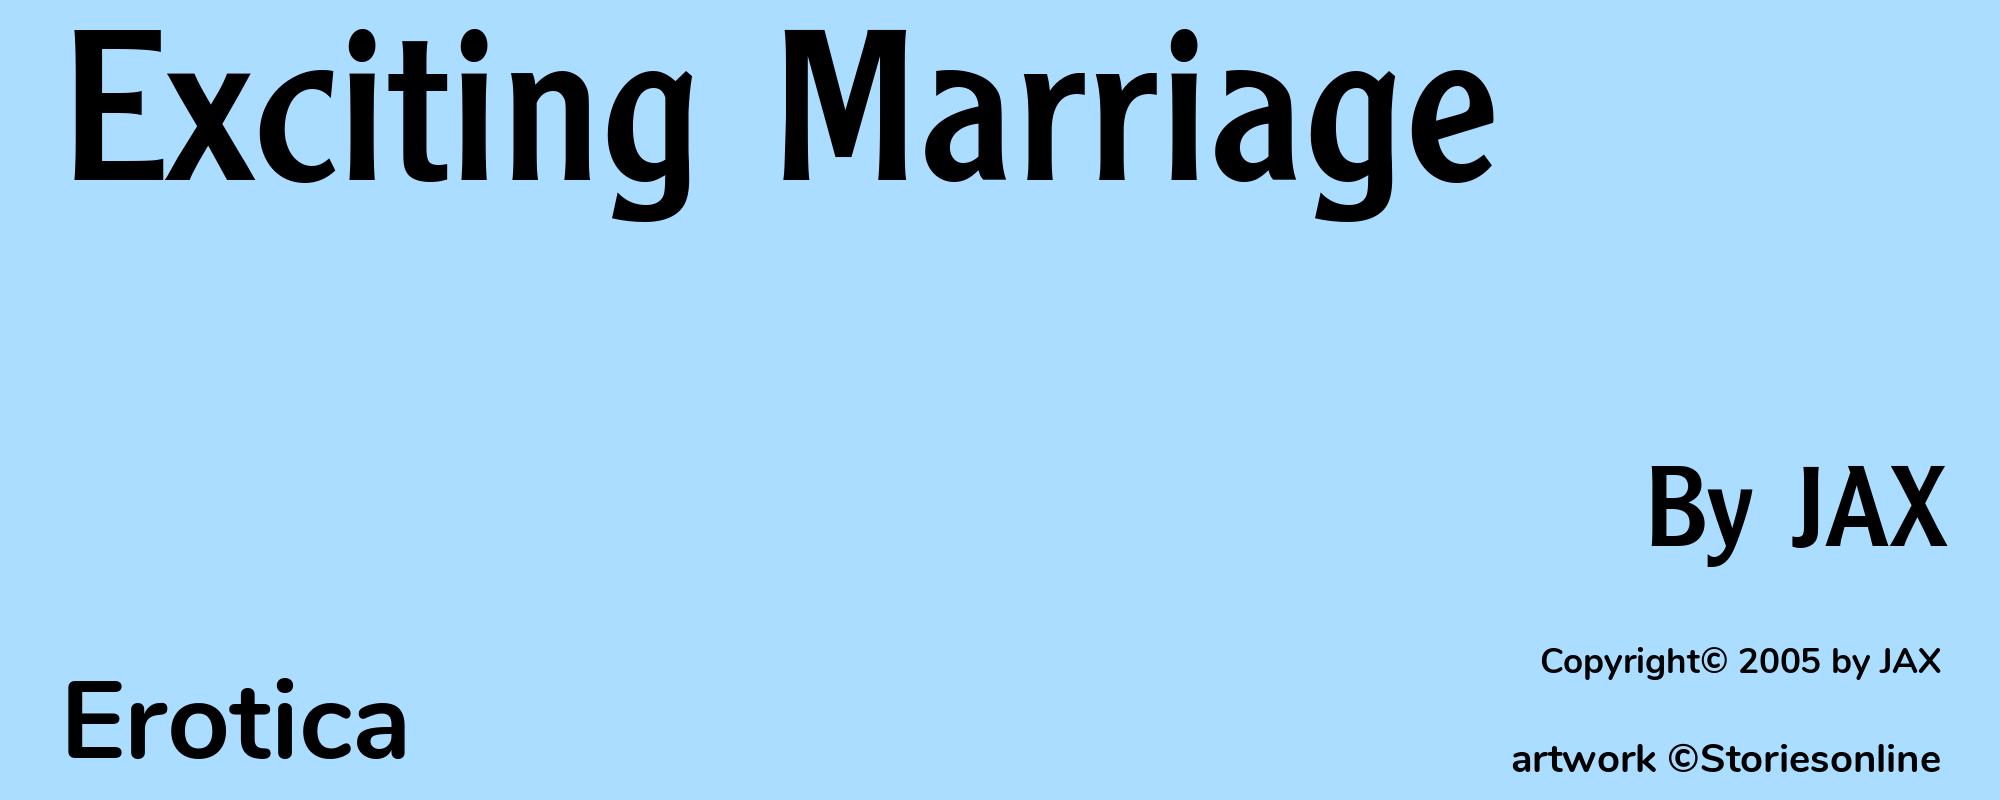 Exciting Marriage - Cover